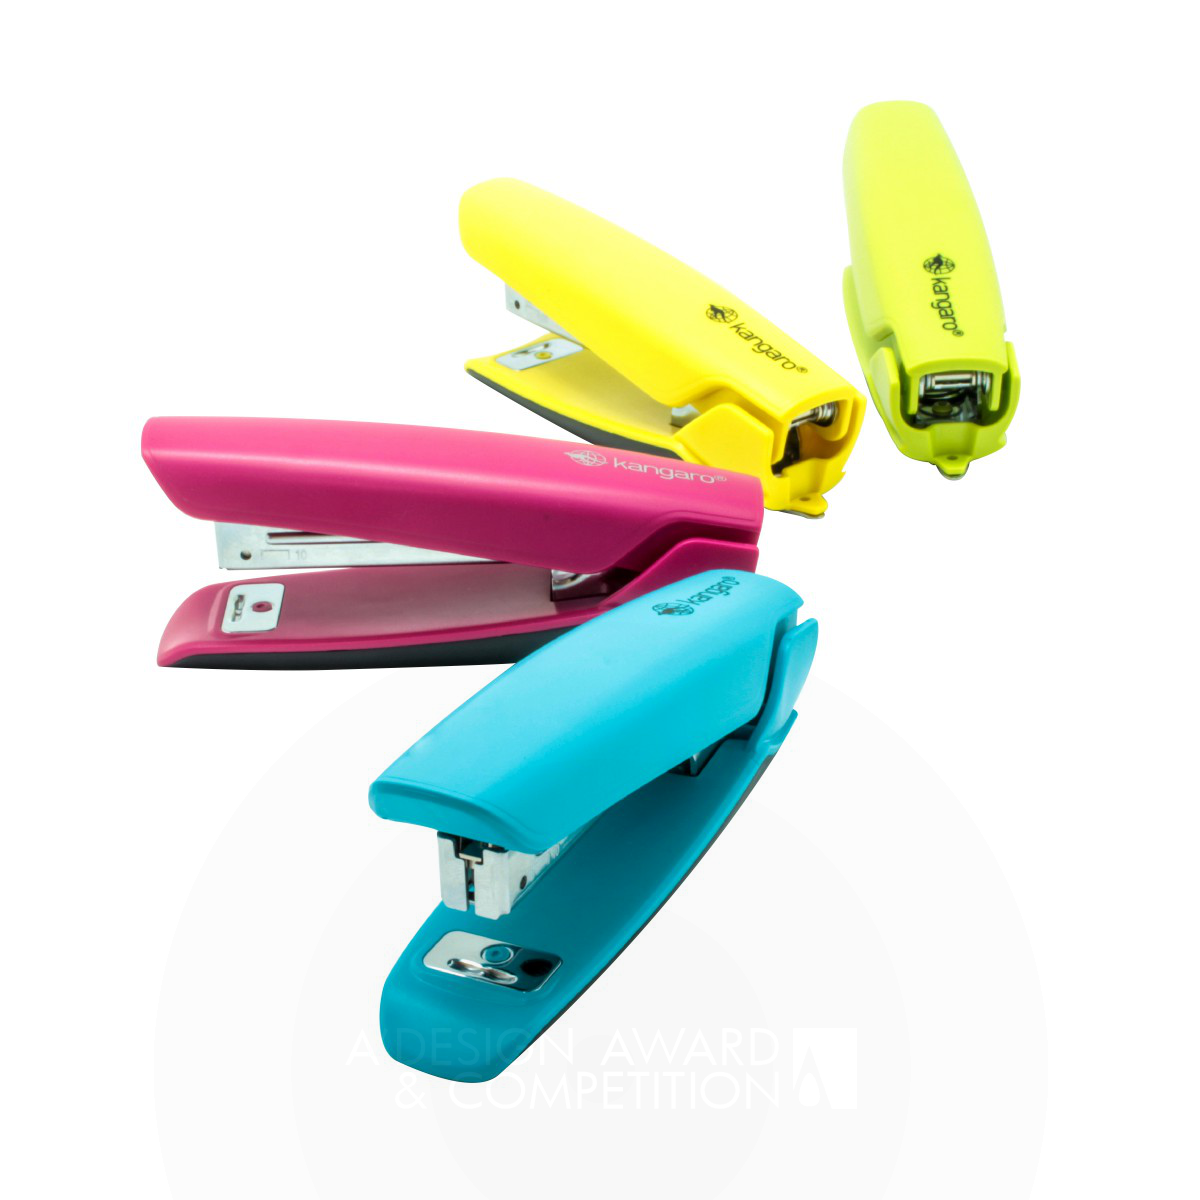 Nowa Staplers by Future Factory